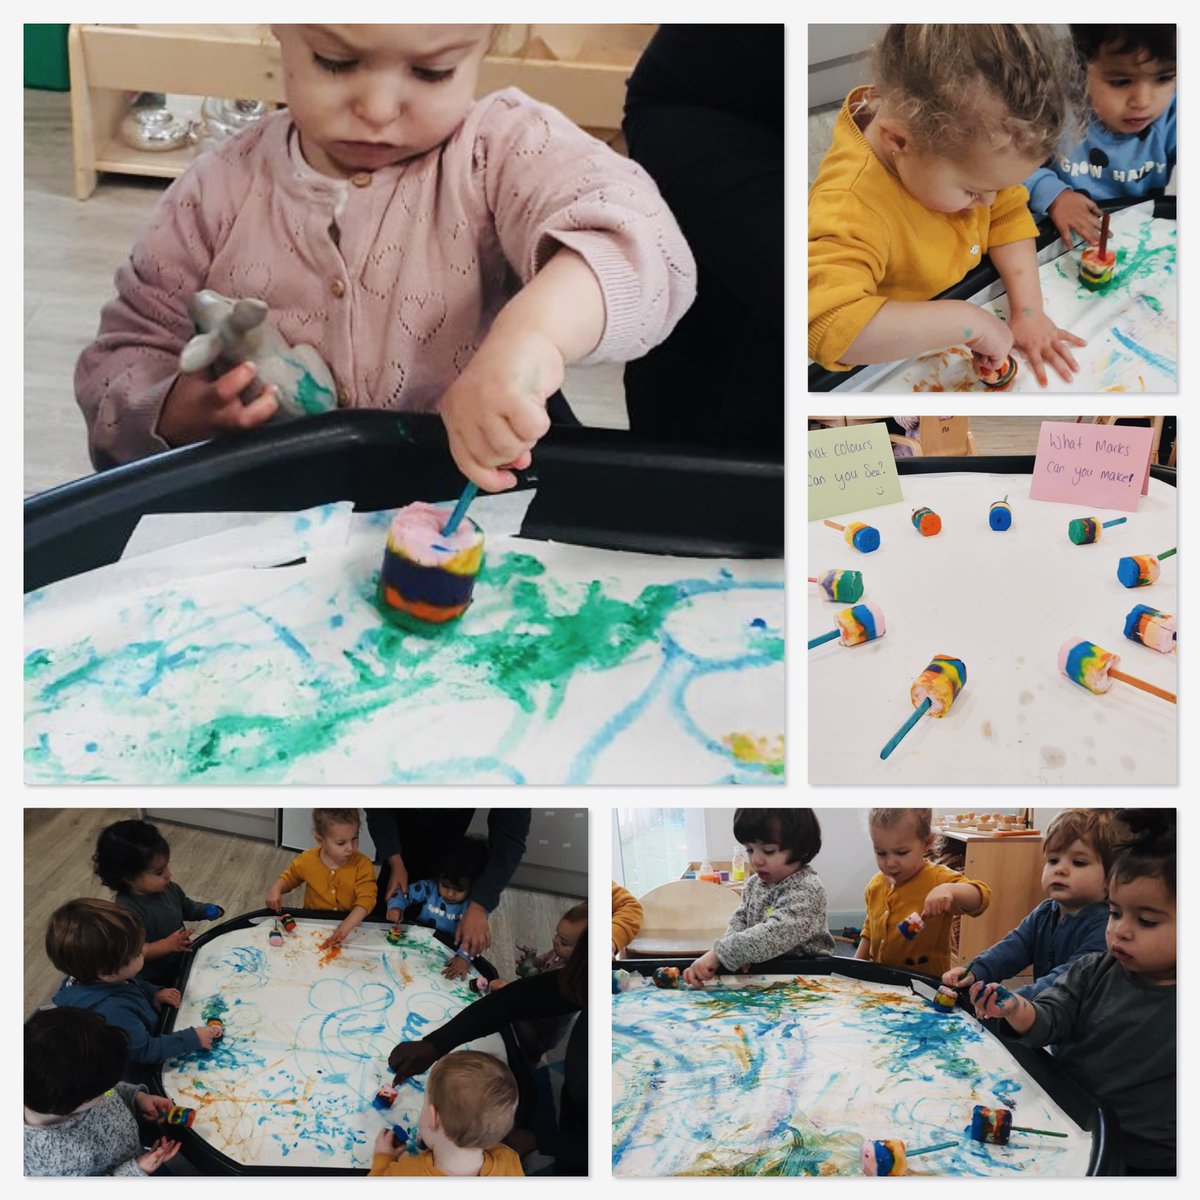 ❄️🎨 #Infants had a wonderful time using #icedpaint to make marks on paper and were fascinated watching the colours mix together. It was a fantastic mark-making experience for our Infants. ❄️🎨

#suchfun #londonnursery #londonmums #londondads #londonparents